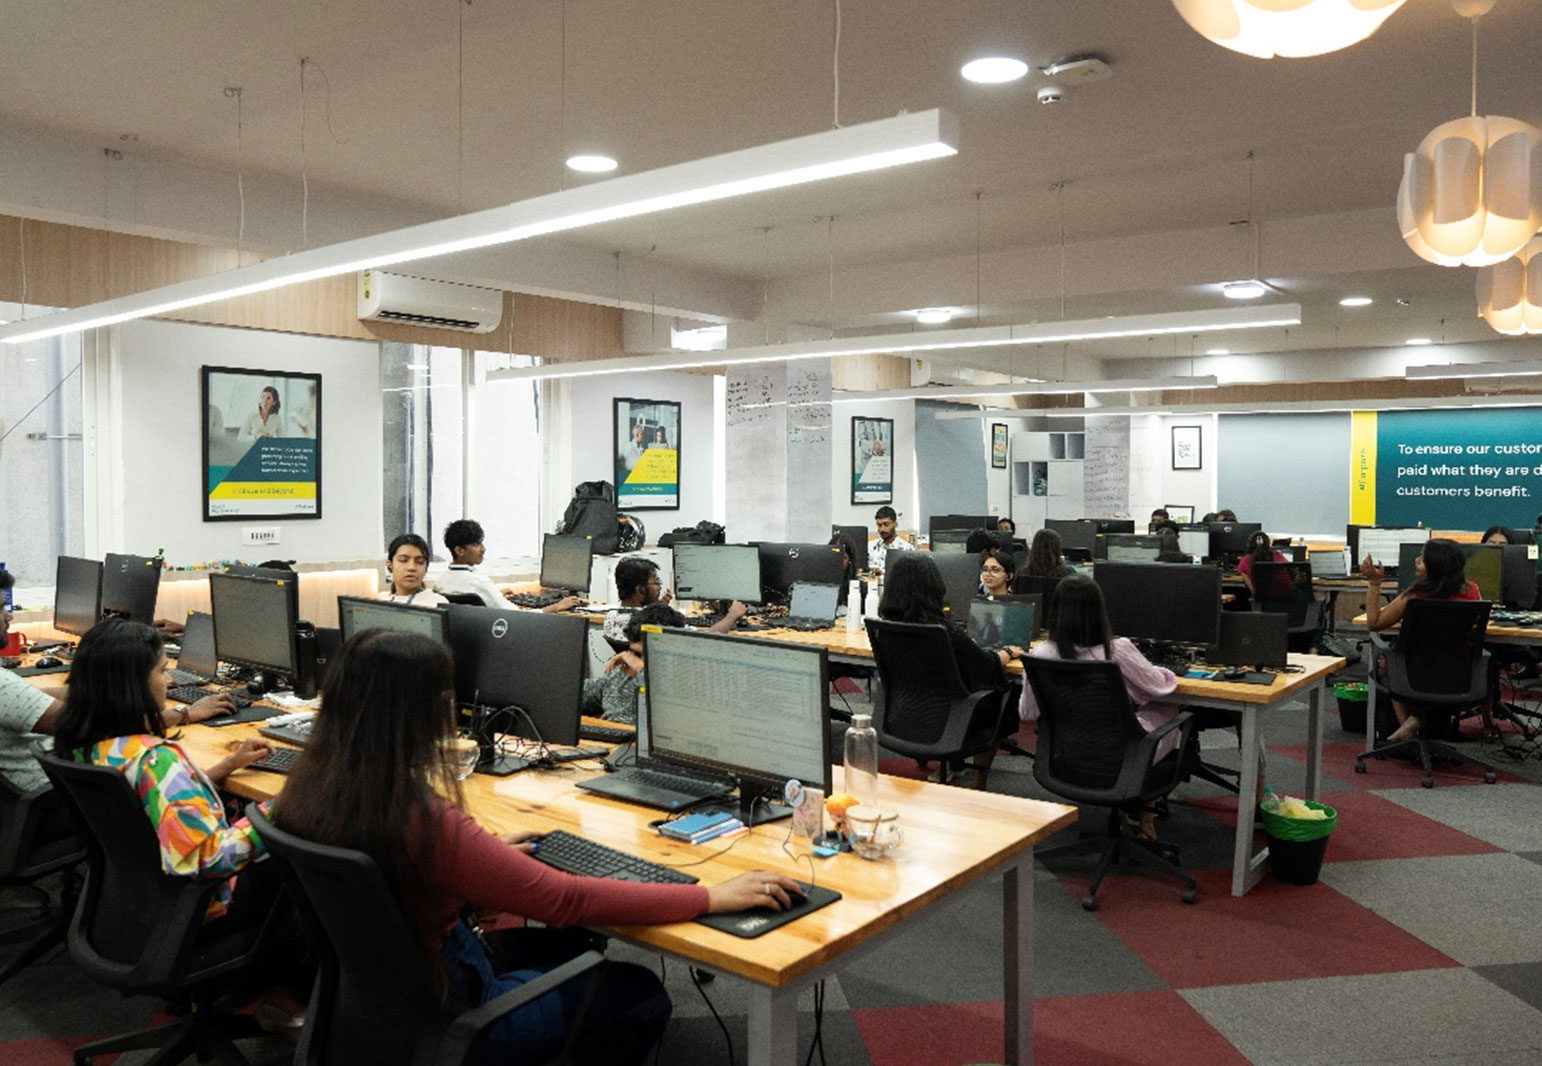 Our India office just got a makeover!